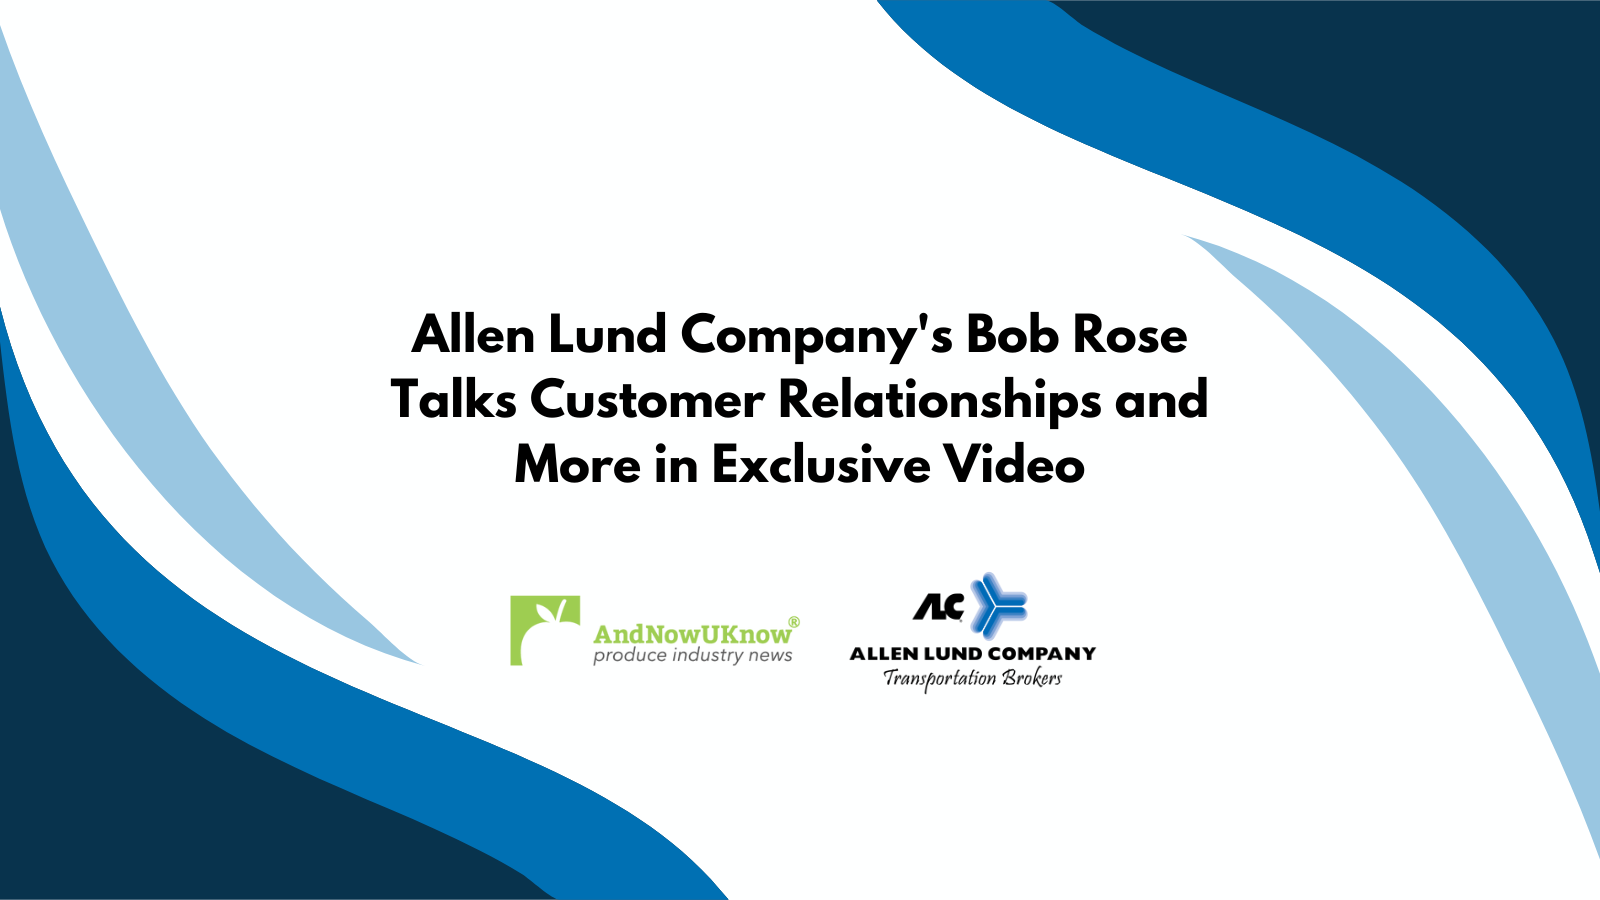 Allen Lund Company’s Bob Rose Talks Customer Relationships and More in Exclusive Video